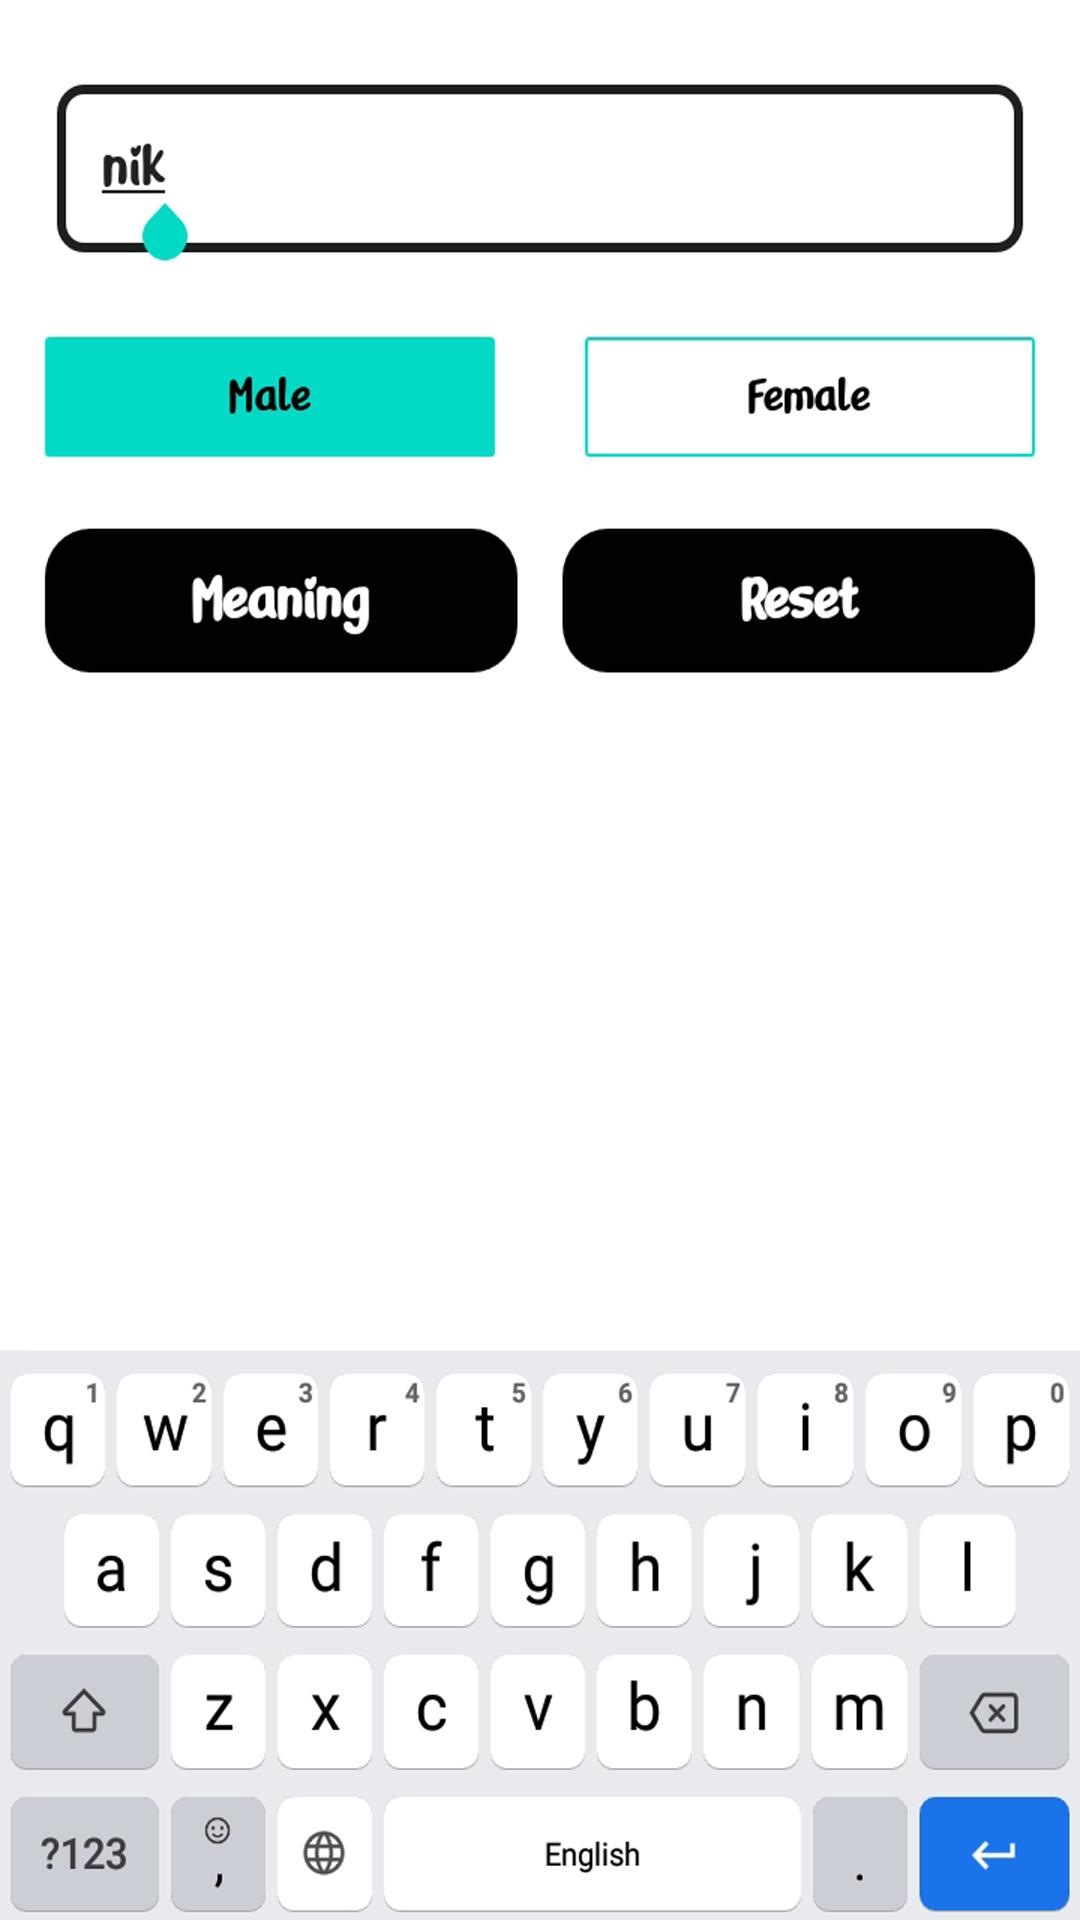 Your Name Fact | Your Name Meaning for Android - APK Download